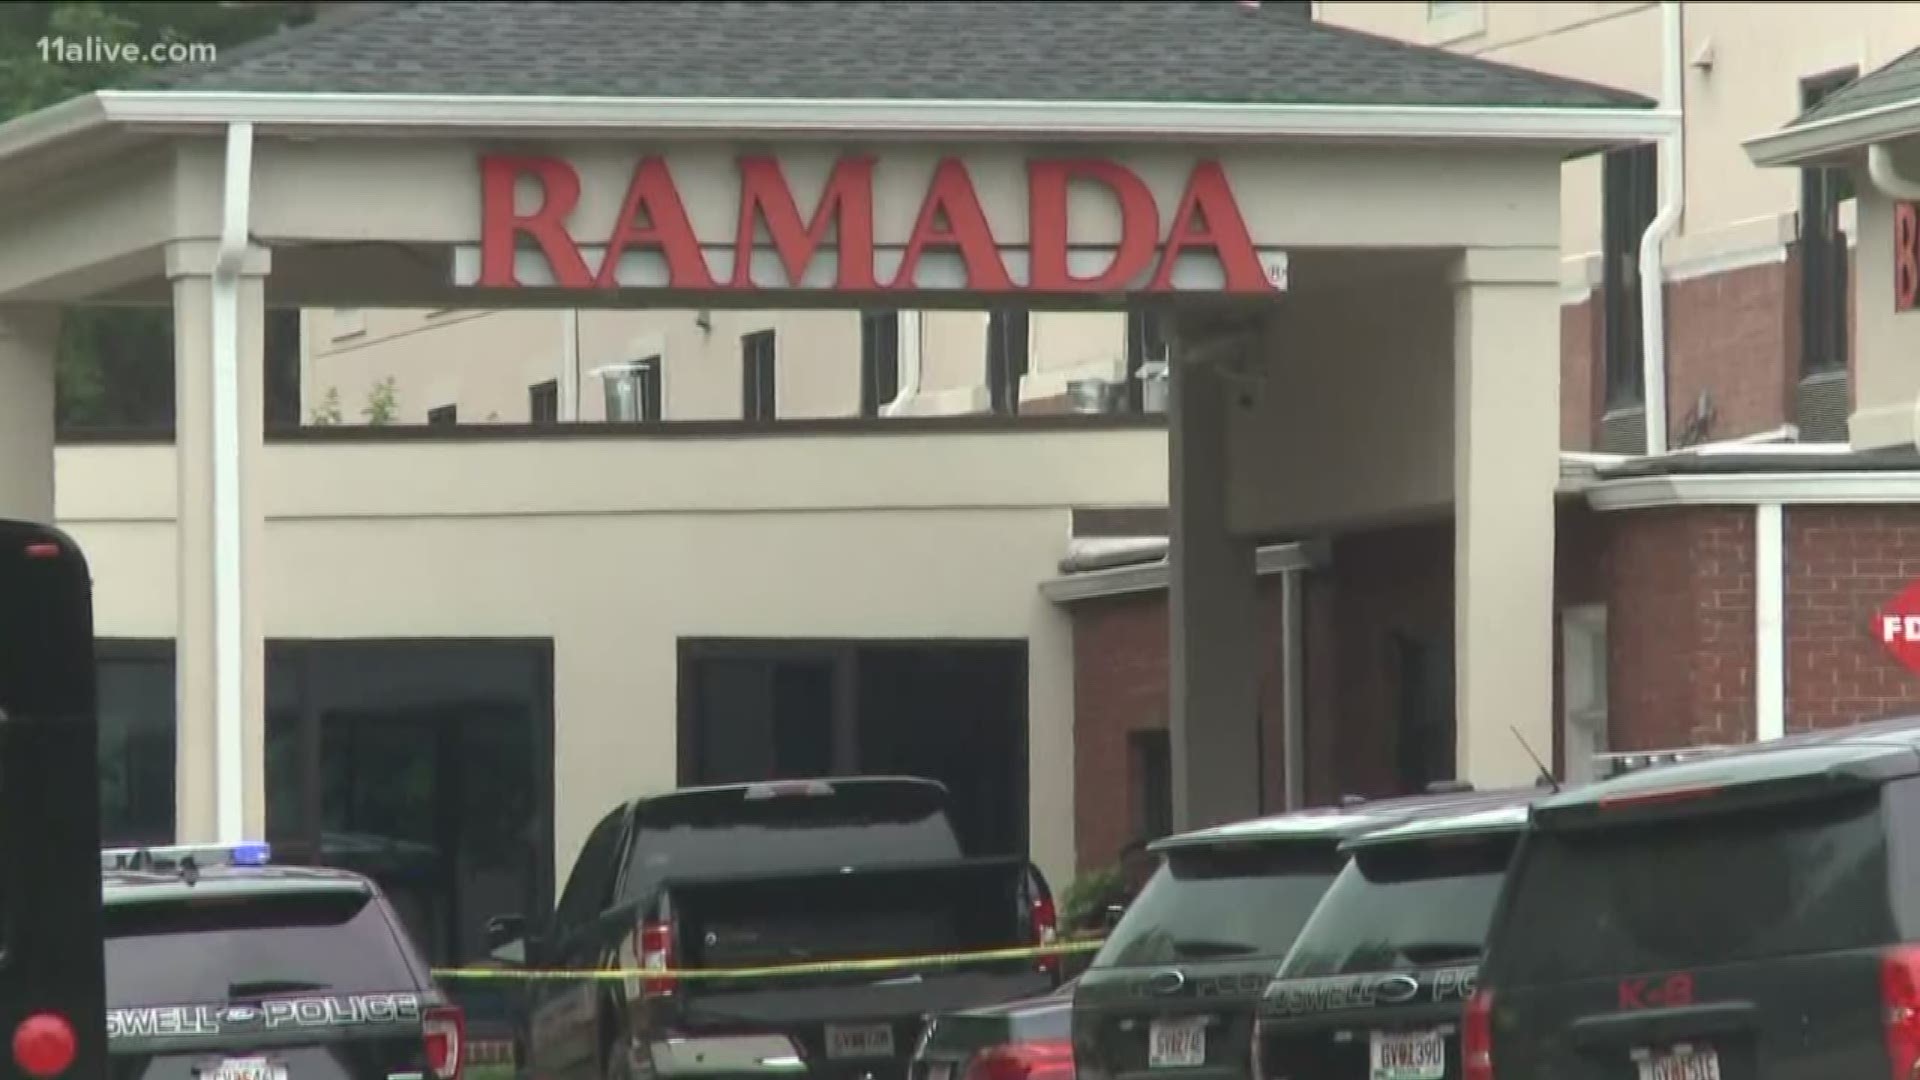 The situation is unfolding at the Ramada Inn on Mansell Road.